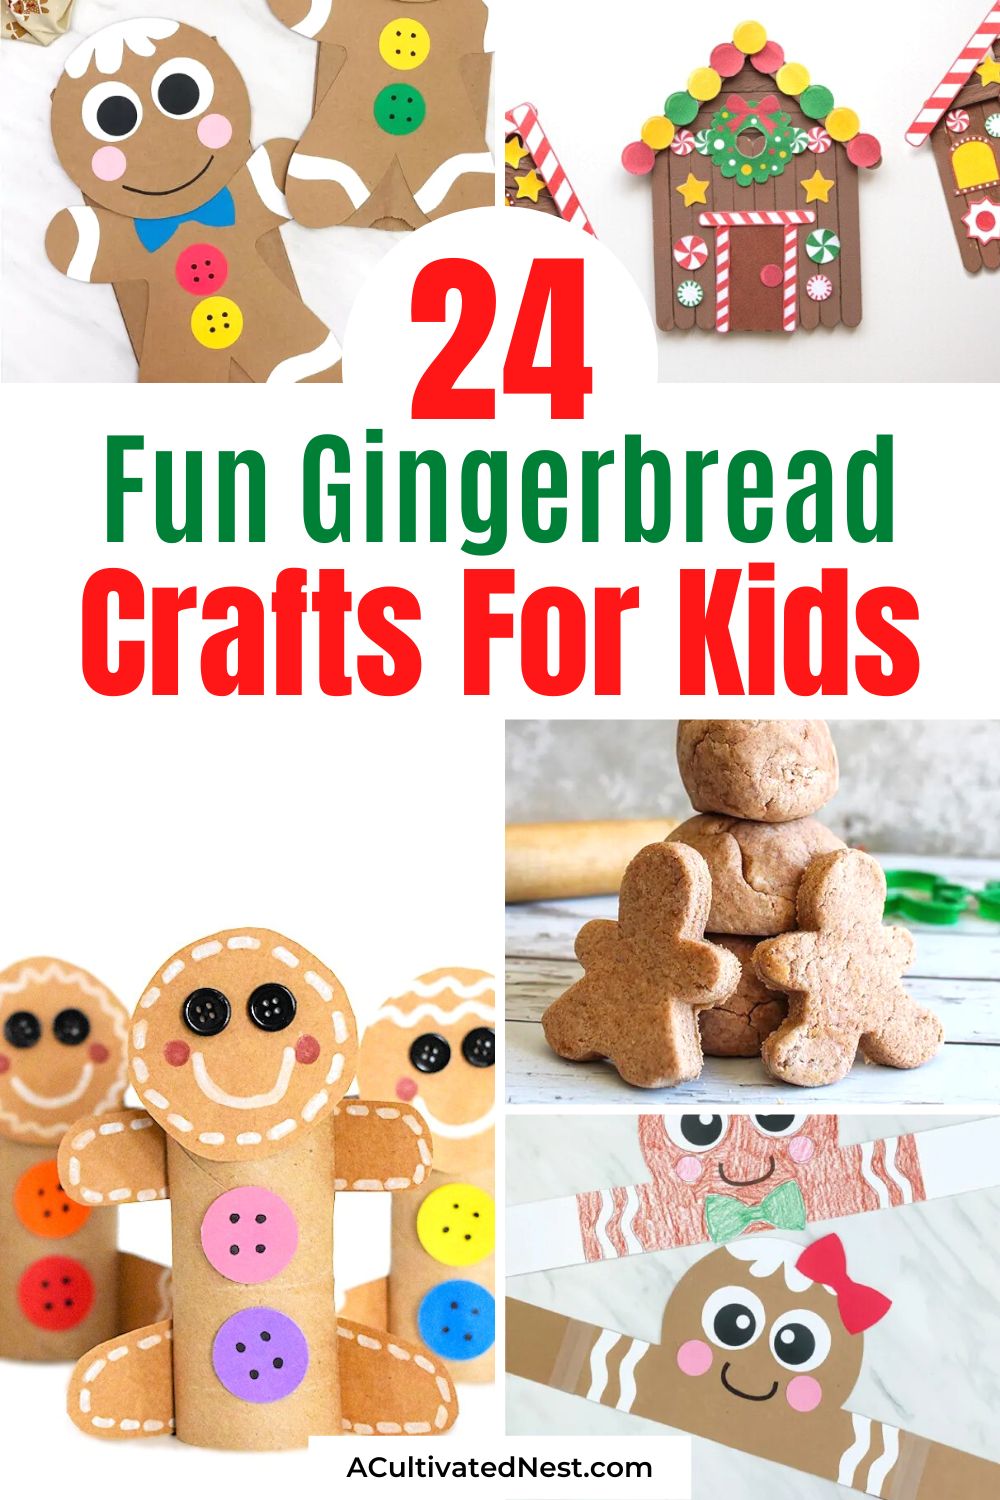 24 Fun Gingerbread Kids Crafts for Christmas- Want some Christmas crafts for your kids to enjoy? Then you'll love these gingerbread kids crafts! They'll have so much fun making gingerbread man and gingerbread house themed crafts! | gingerbread house crafts, gingerbread man crafts, #kidsActivities #gingerbreadHouse #craftsForKids #ChristmasCraftIdeas #ACultivatedNest